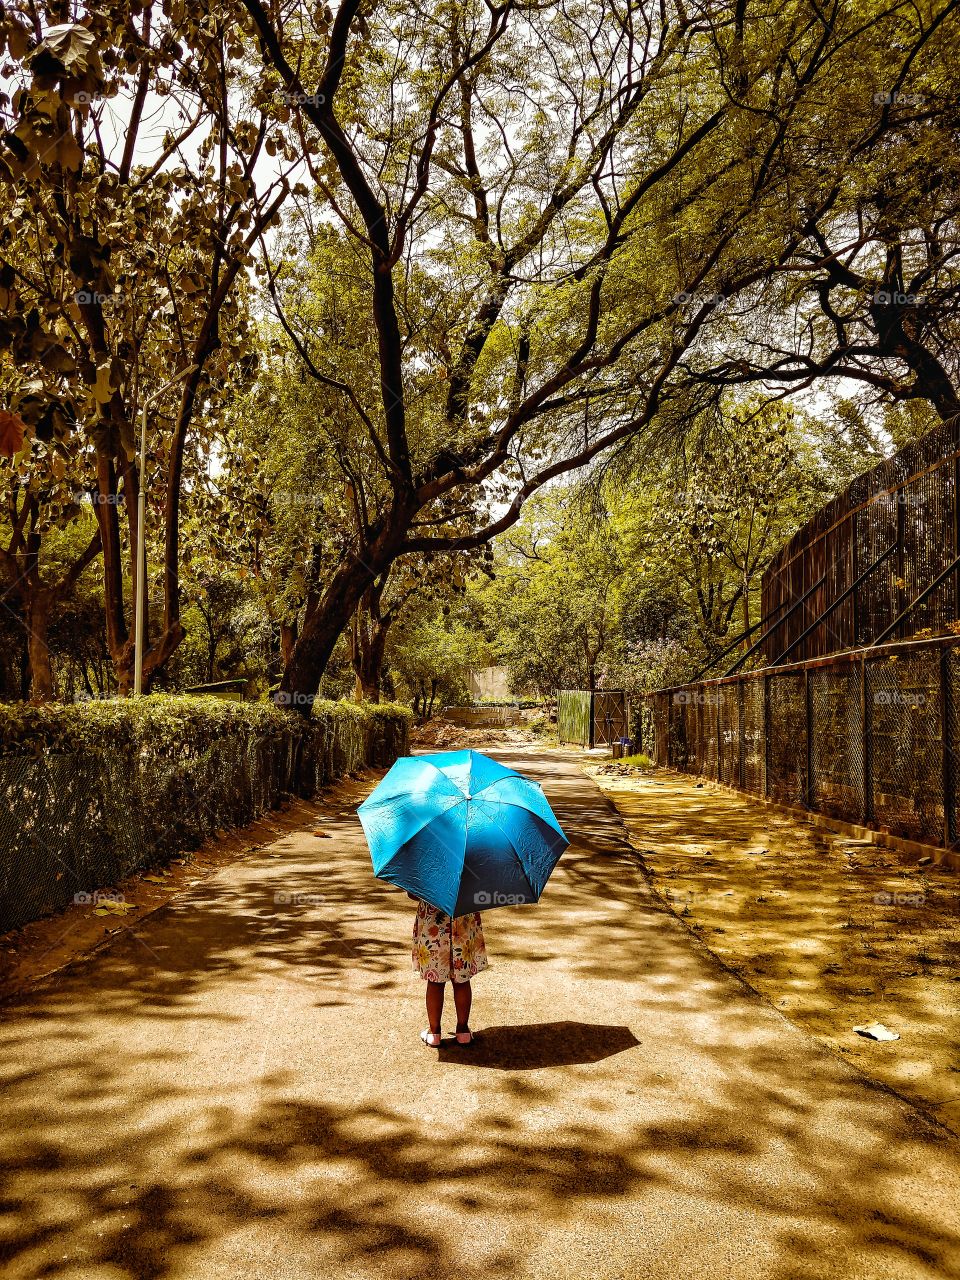 a girl standing under umbrella in very hot day during travelling